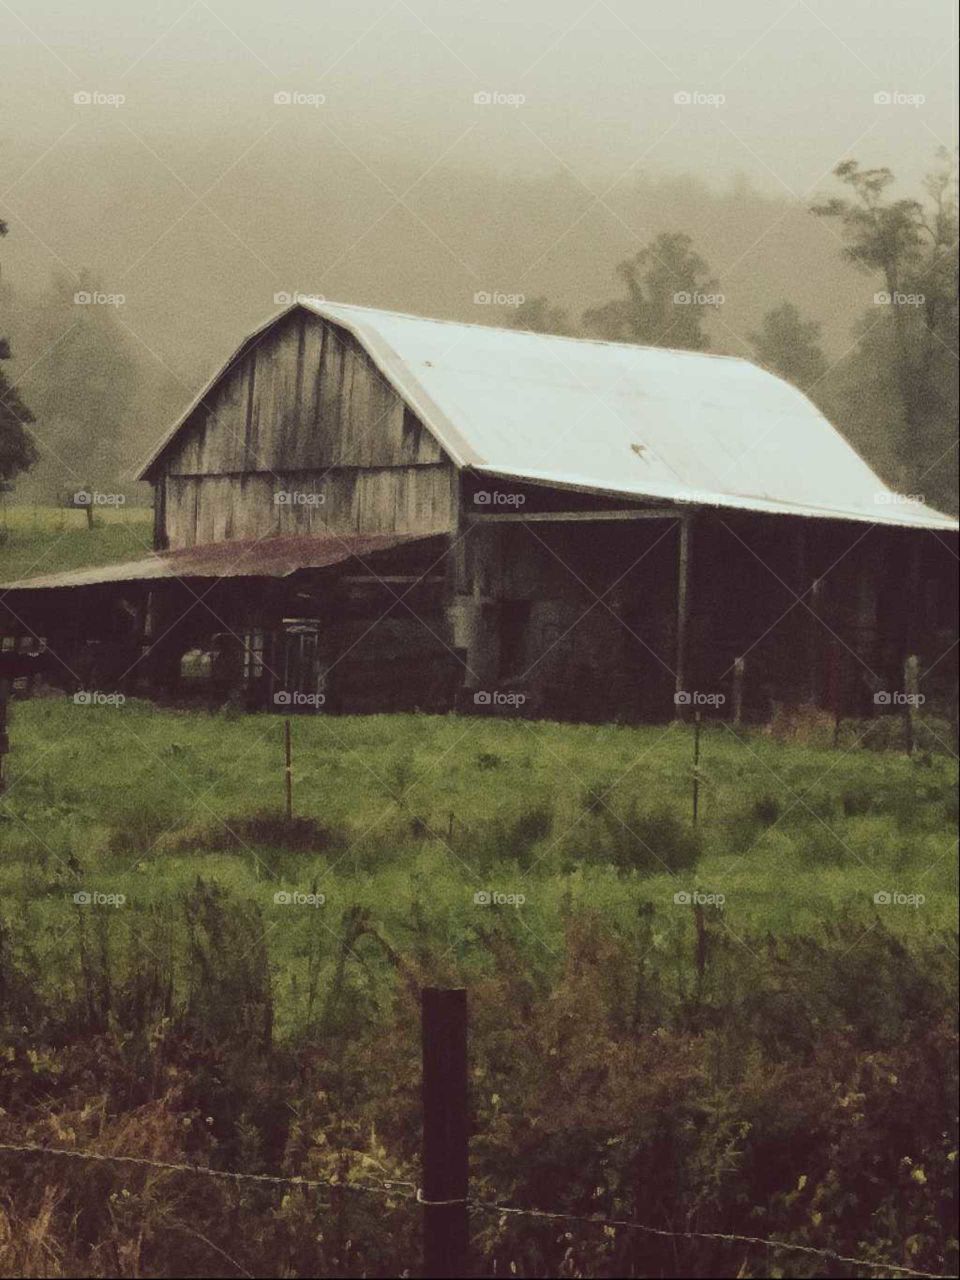 Old dilapidated barn in the middle of the country on a rainy foggy morning.